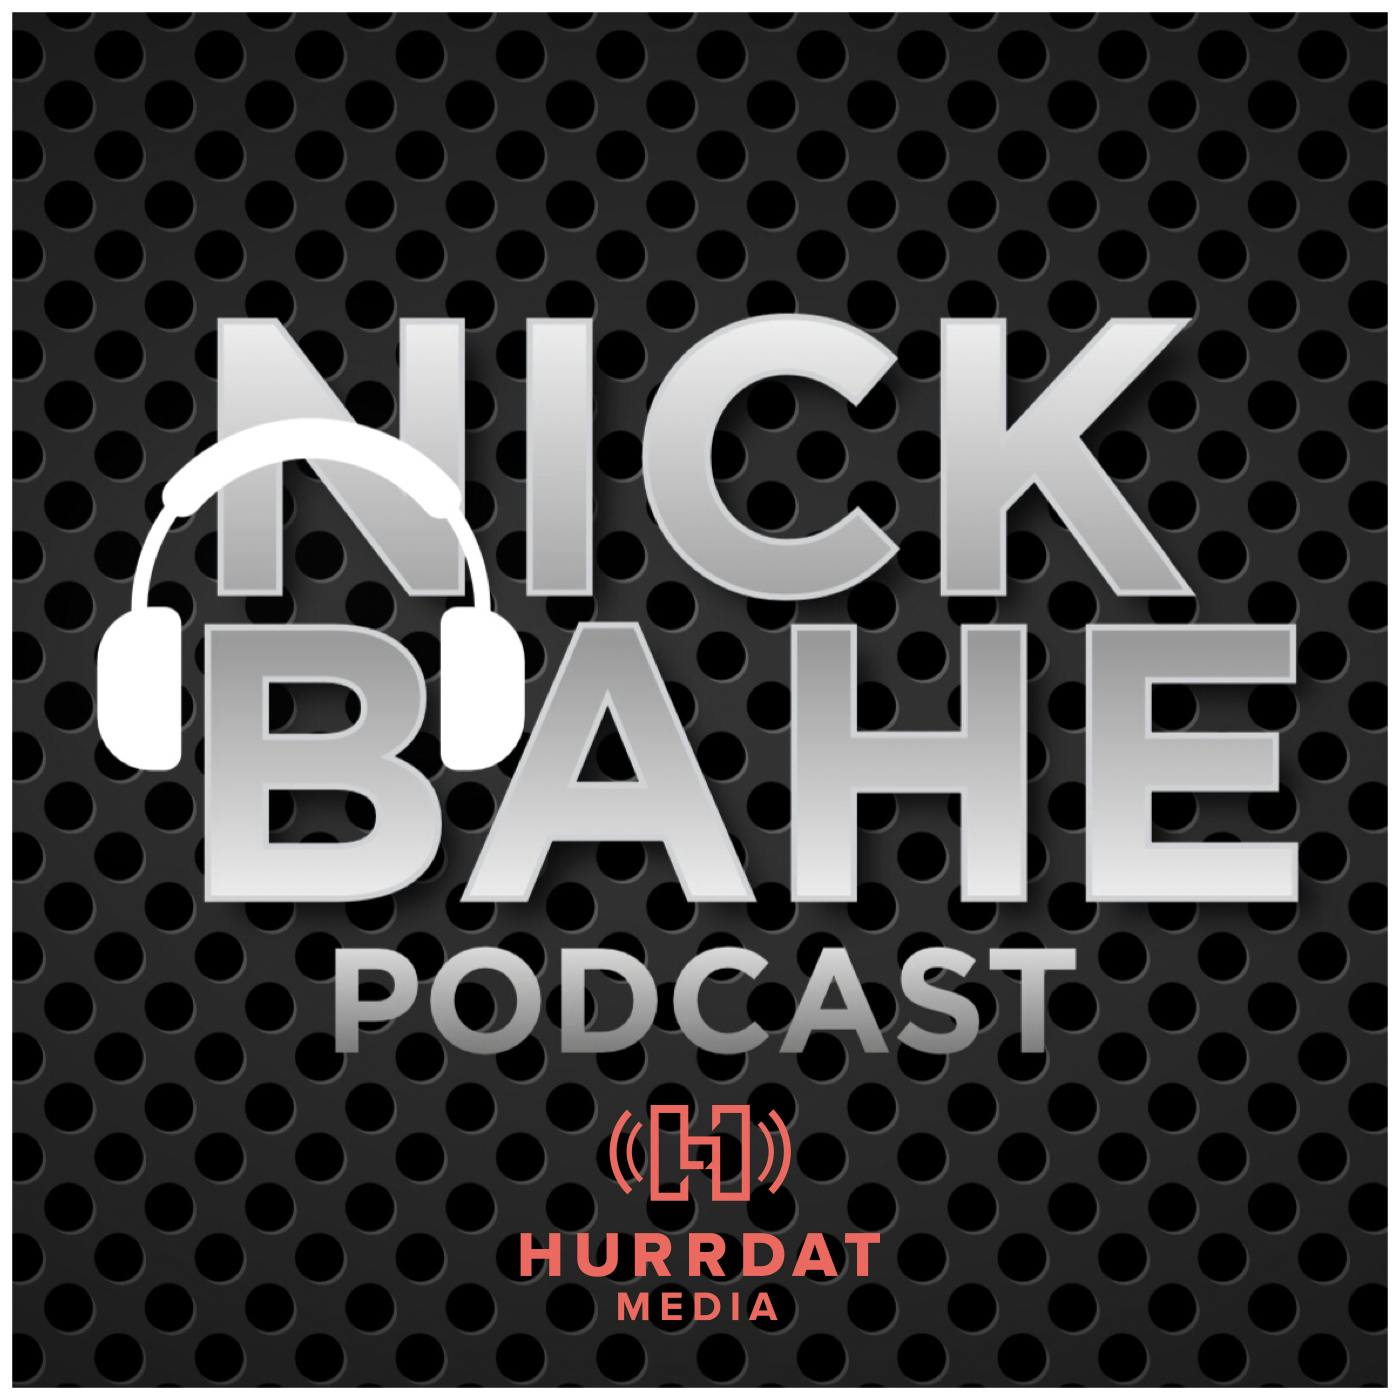 Beers, Vegas stories, Husker Football, & Life - Nick's buddy Willie stops by to drink beer and talk about their upcoming trip to Vegas, getting older, Husker Football & life